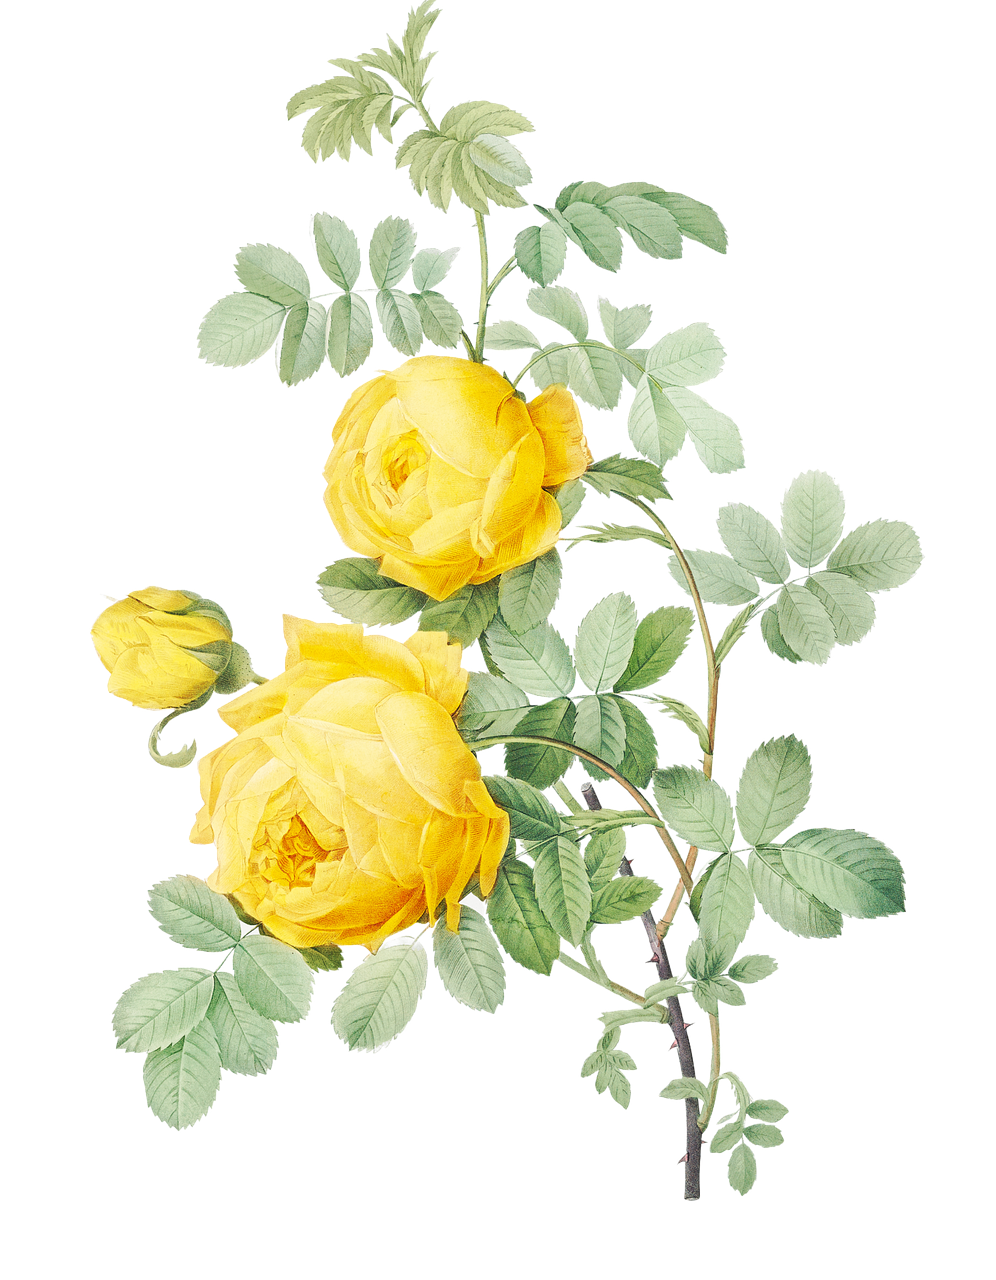 two yellow roses with green leaves on a black background, a digital rendering, by Gusukuma Seihō, romanticism, nothofagus, hiroo isono, artist's impression, shishkin